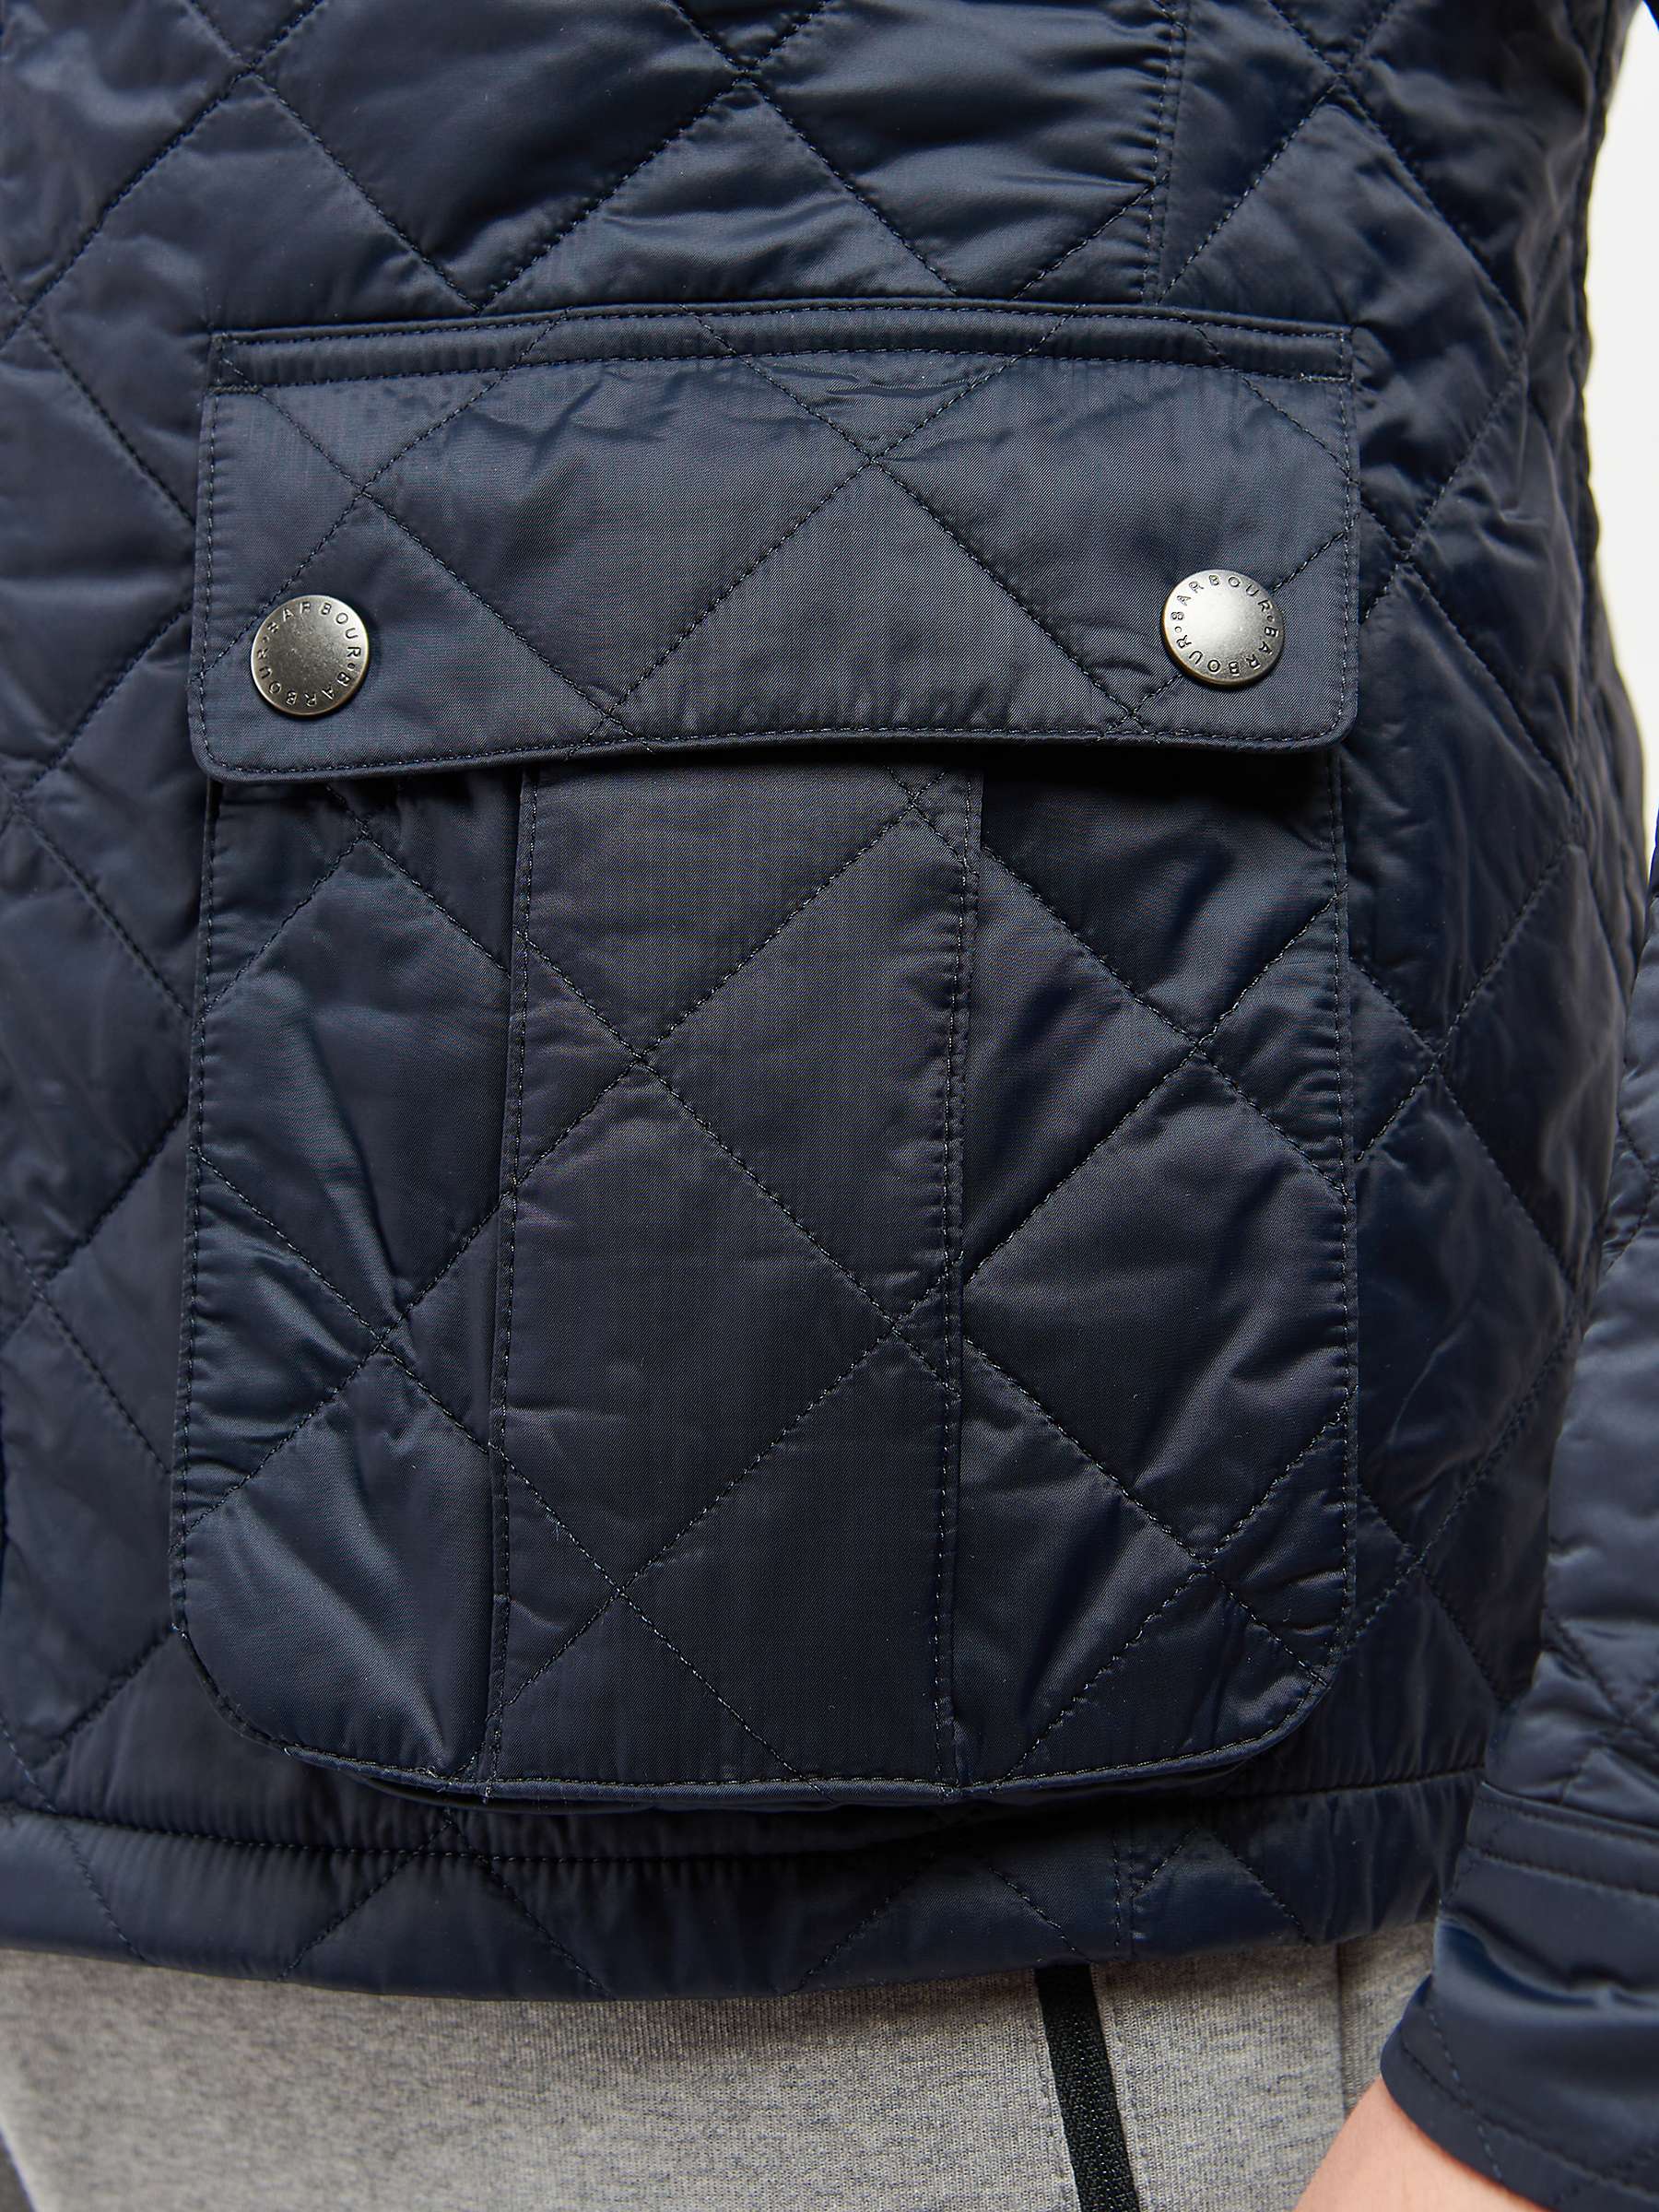 Buy Barbour International Ariel Soft Touch Quilted Jacket Online at johnlewis.com